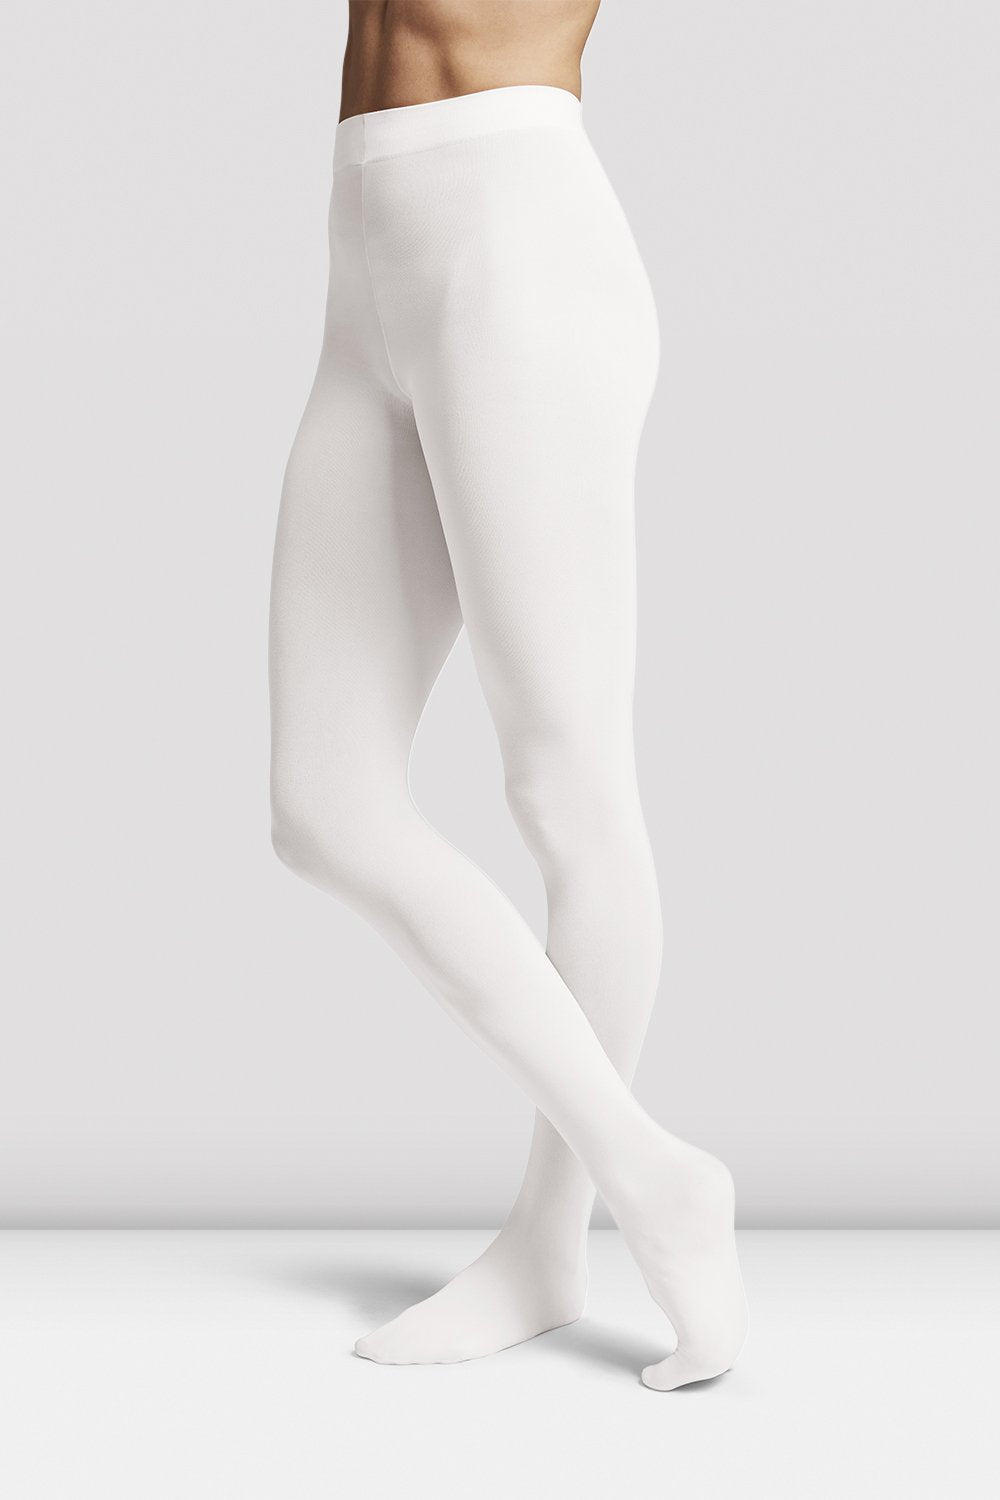 HYPAW Tights Pattern Stockings Pantyhose Style Hosiery Women (Color : Style  4 White, Size : Onesize) : : Fashion